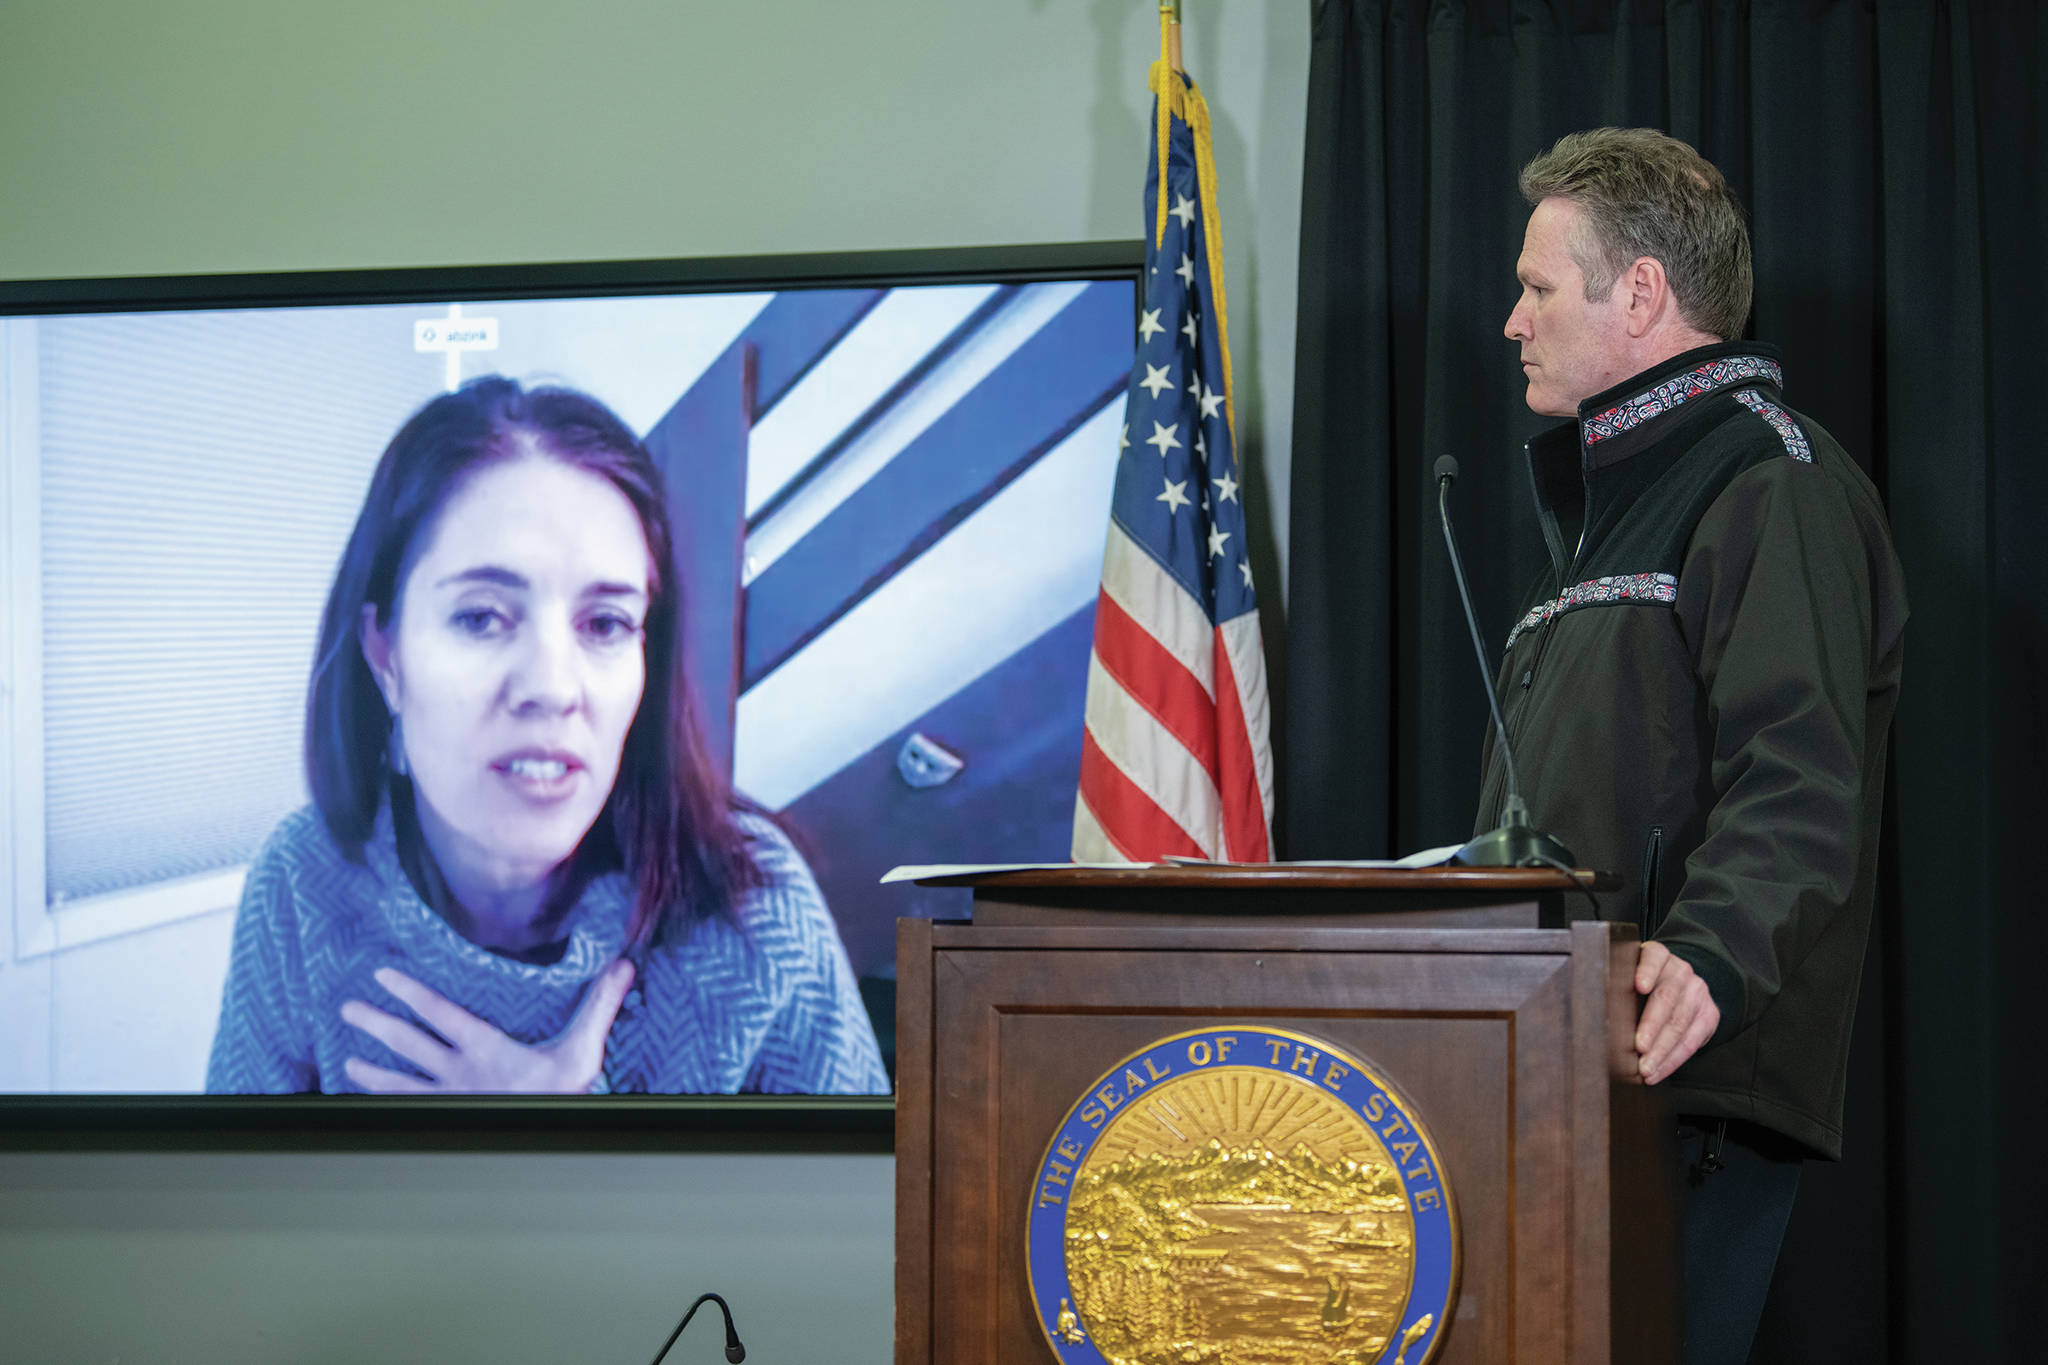 Alaska Chief Medical Officer Dr. Anne Zink, left, speaks by video in a press conference on April 6, 2020, in Juneau, Alaska, while Gov. Mike Dunleavy, right, listens. (Photo by Austin McDaniel, Alaska Governor’s Office)